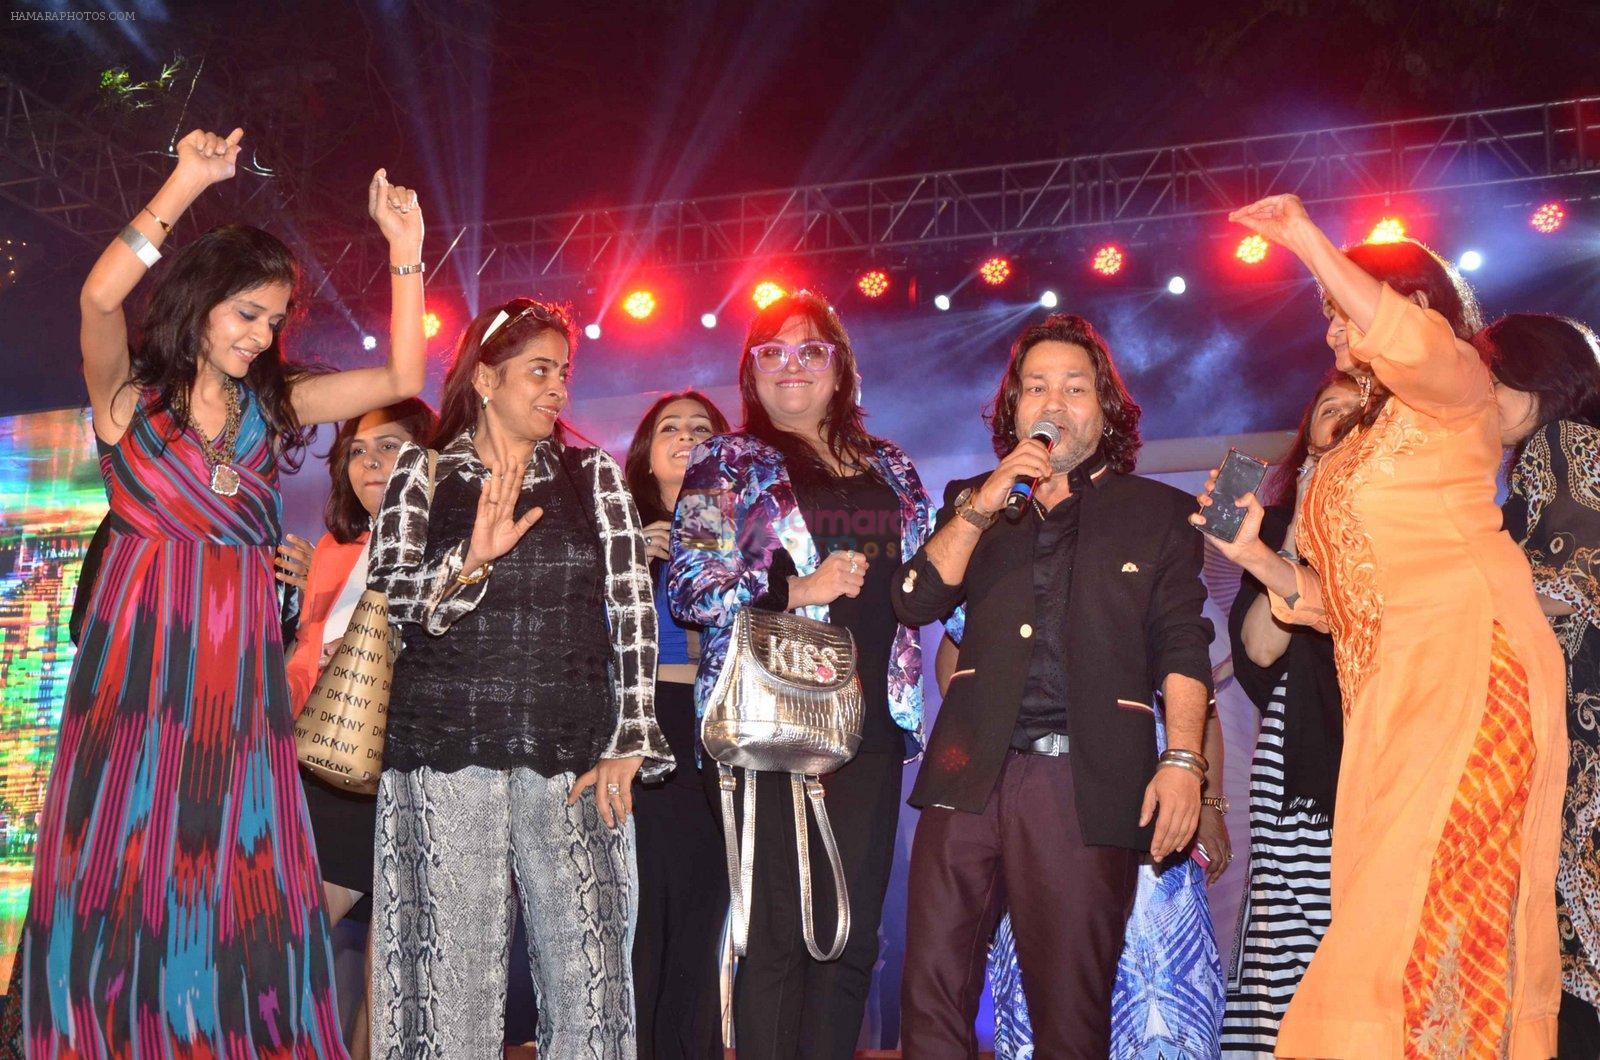 Kailash Kher at Kingfisher Ultra Derby Draw on 4th Feb 2016